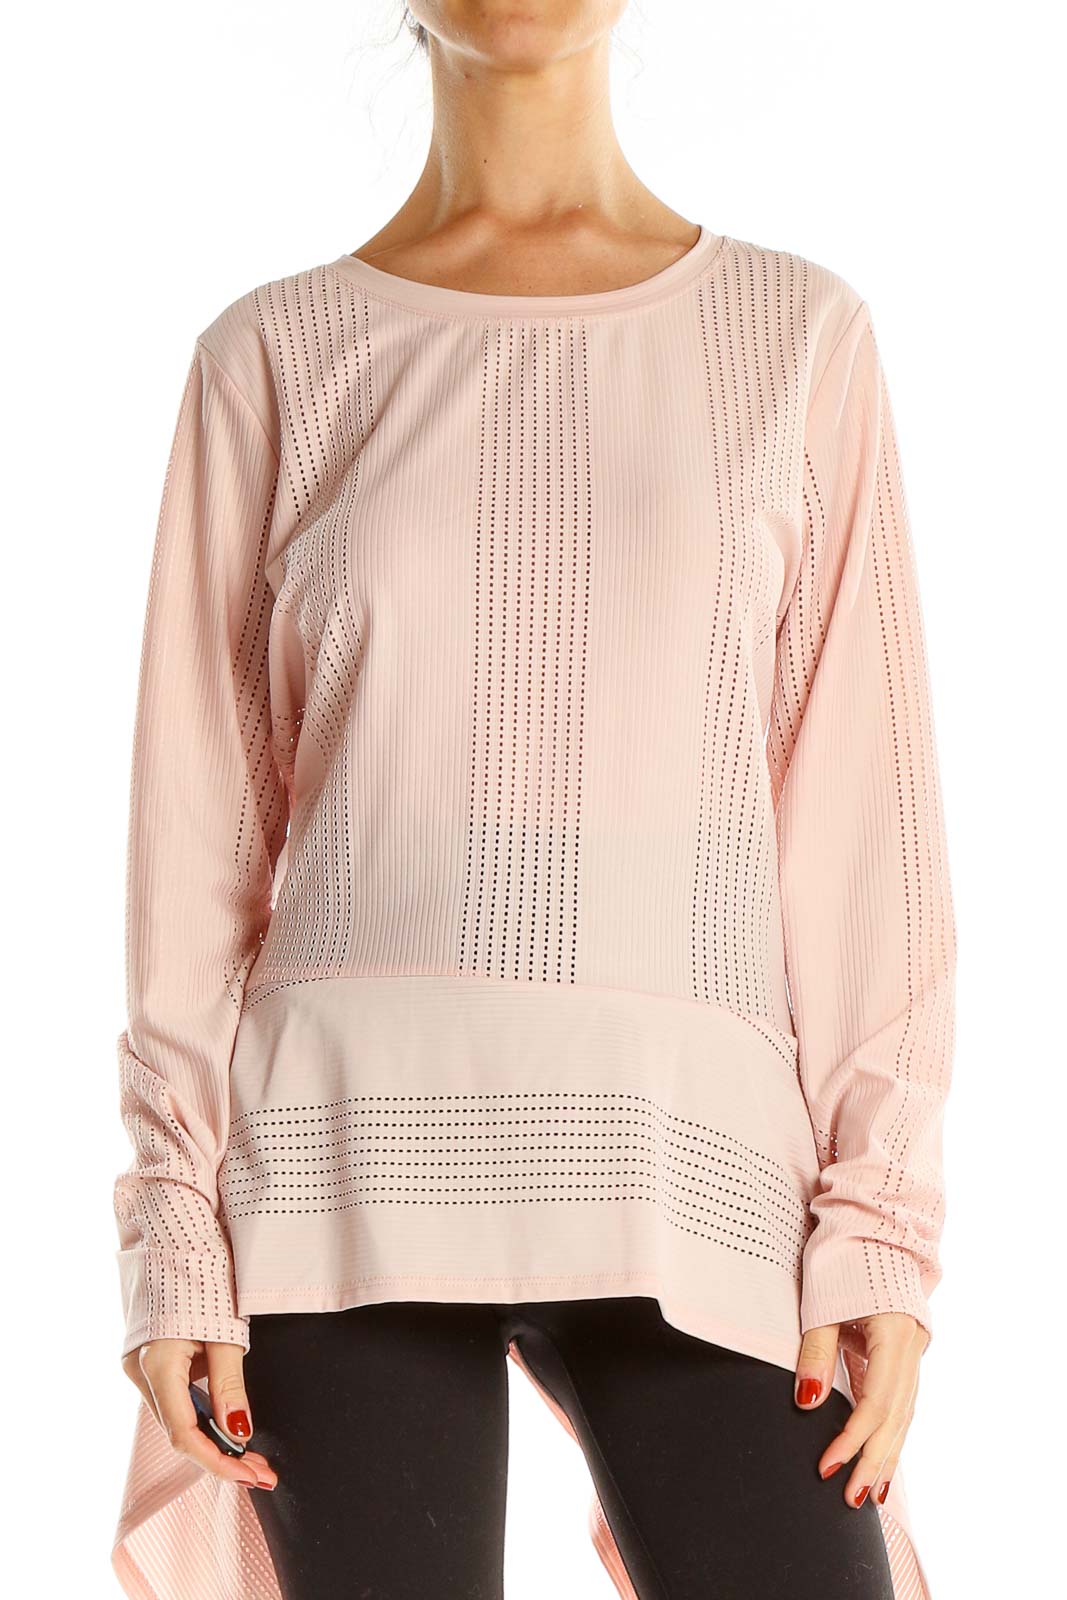 Pink Textured Chic Blouse Front